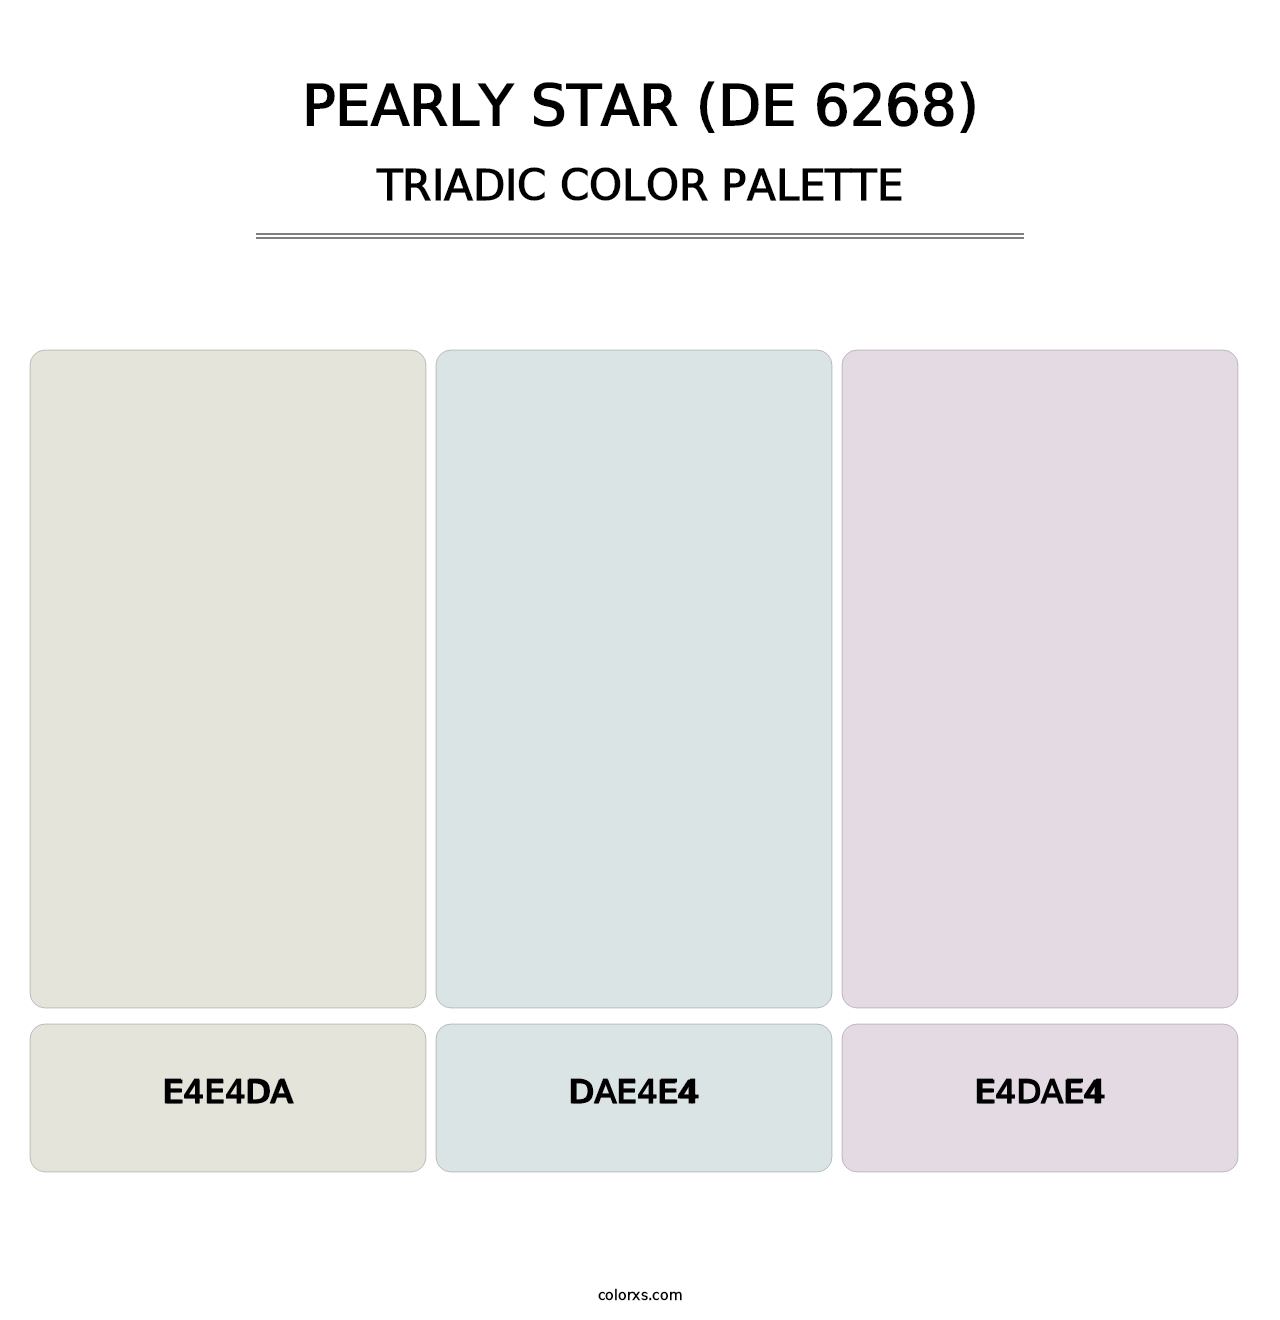 Pearly Star (DE 6268) - Triadic Color Palette